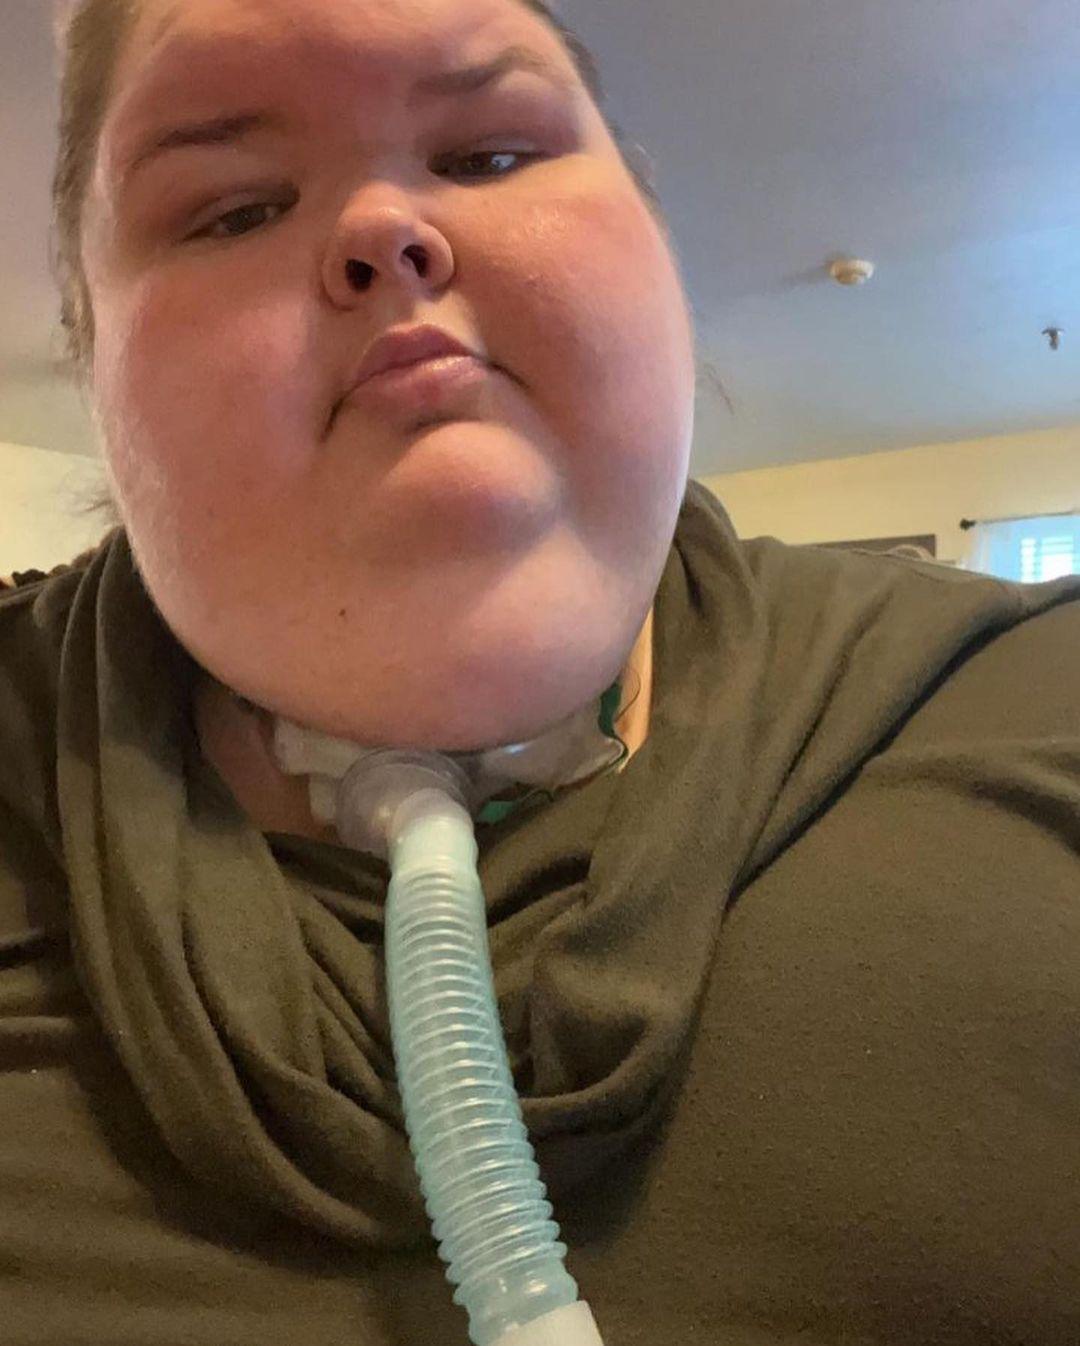 '1000-LB Sisters' Star Shares Shocking Photos With Tracheostomy Tube